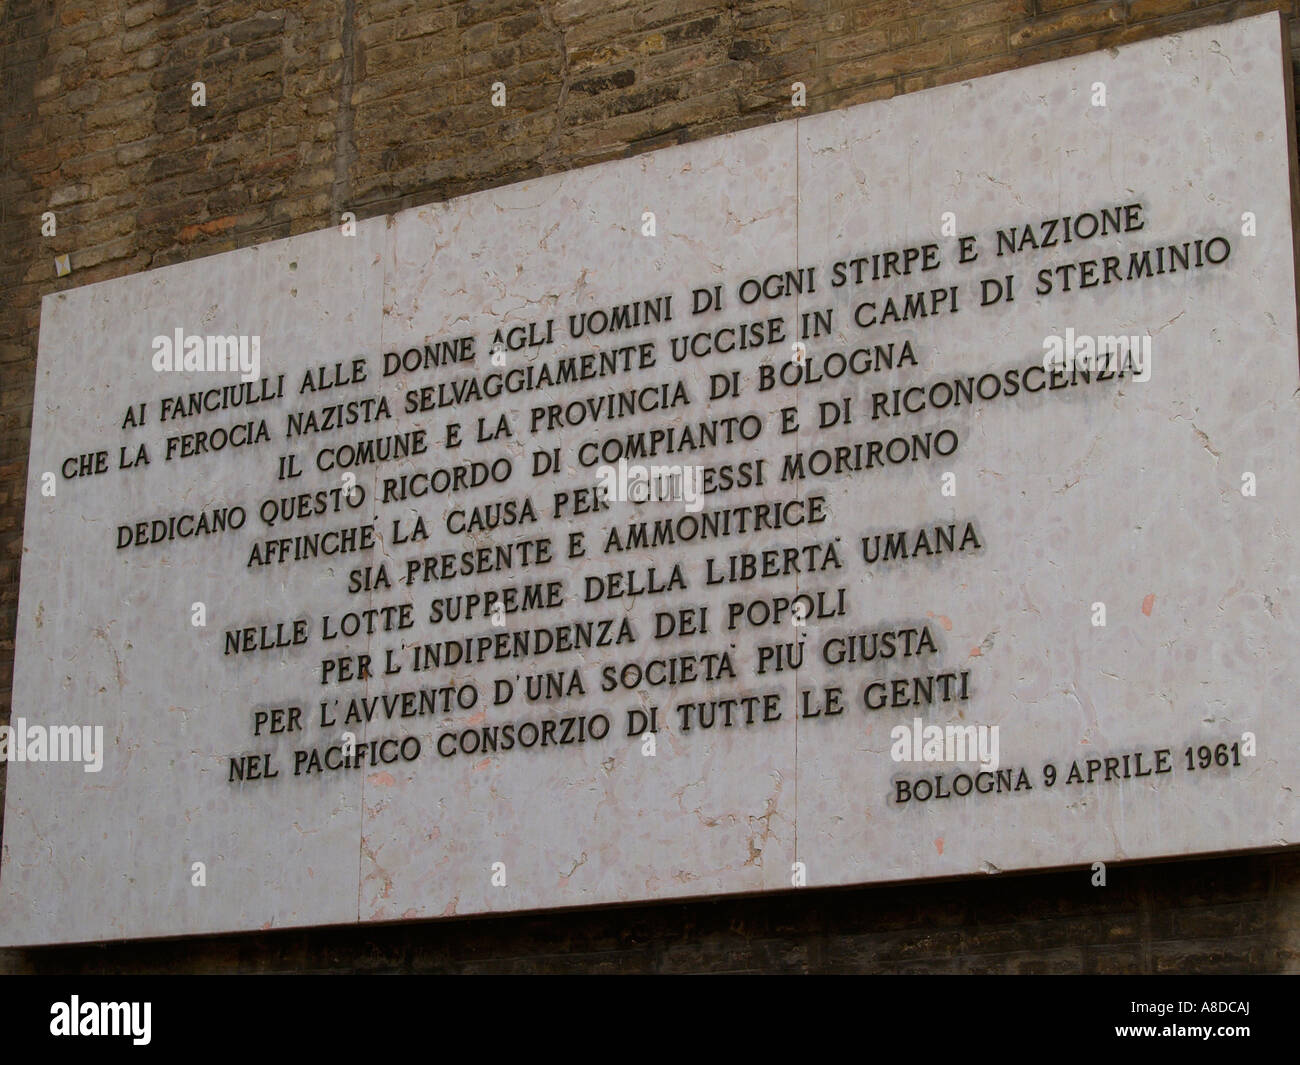 On the wall outside Sala Borsa in piazza del Nettuno is the memorial to Bolognese partisans killed by fascists during WWII. Stock Photo